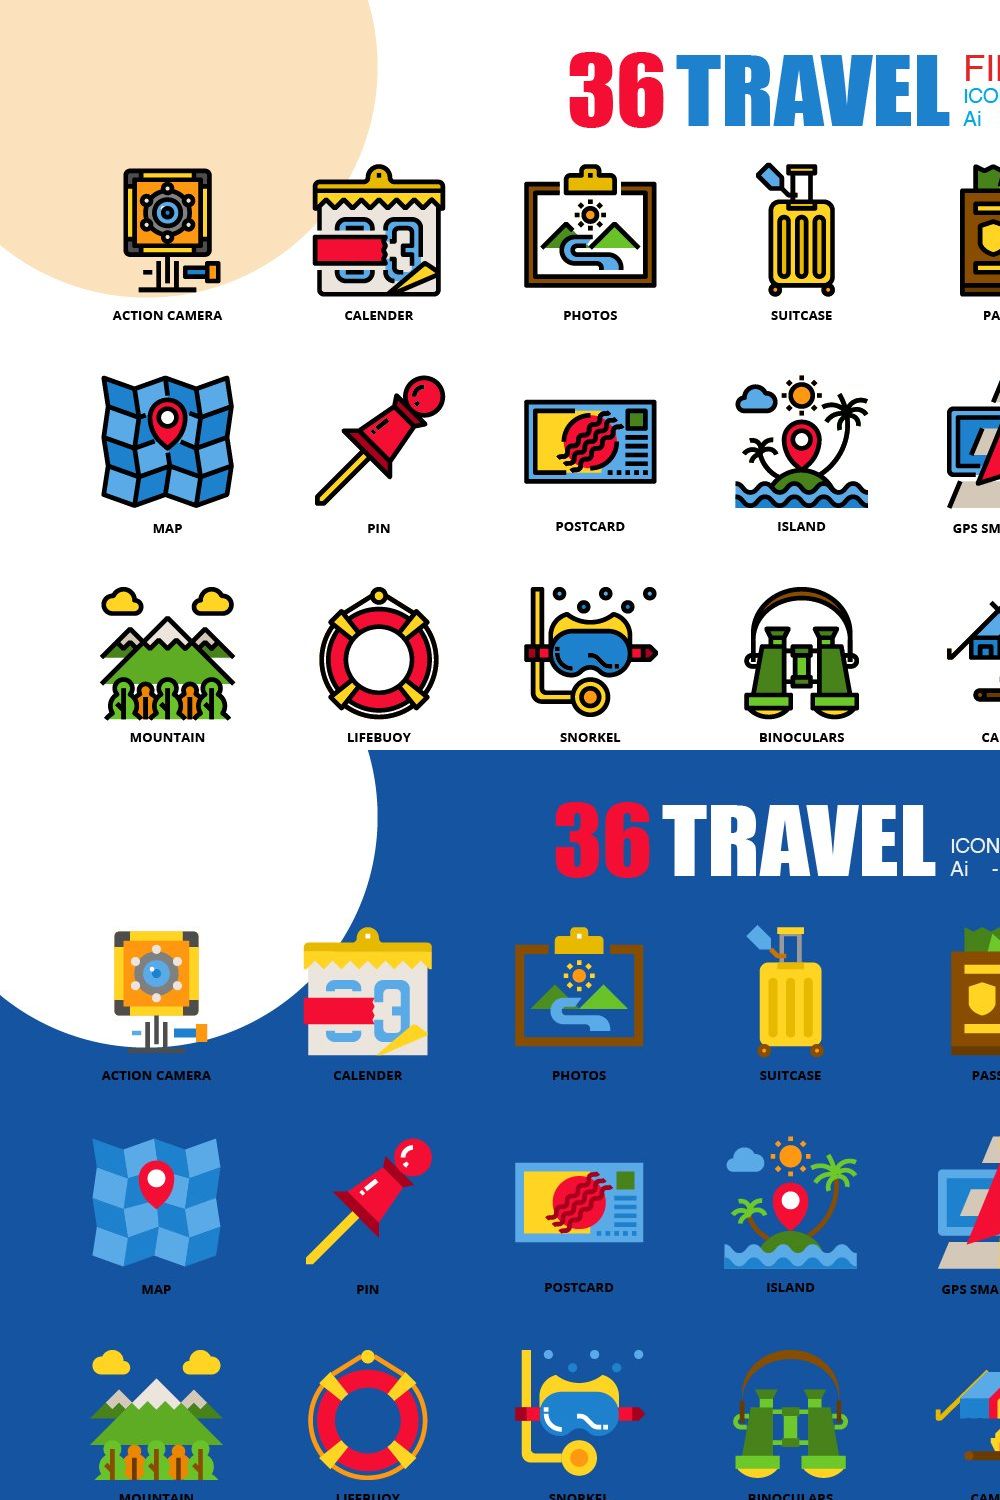 36 Travel icons set x 3 style pinterest preview image.